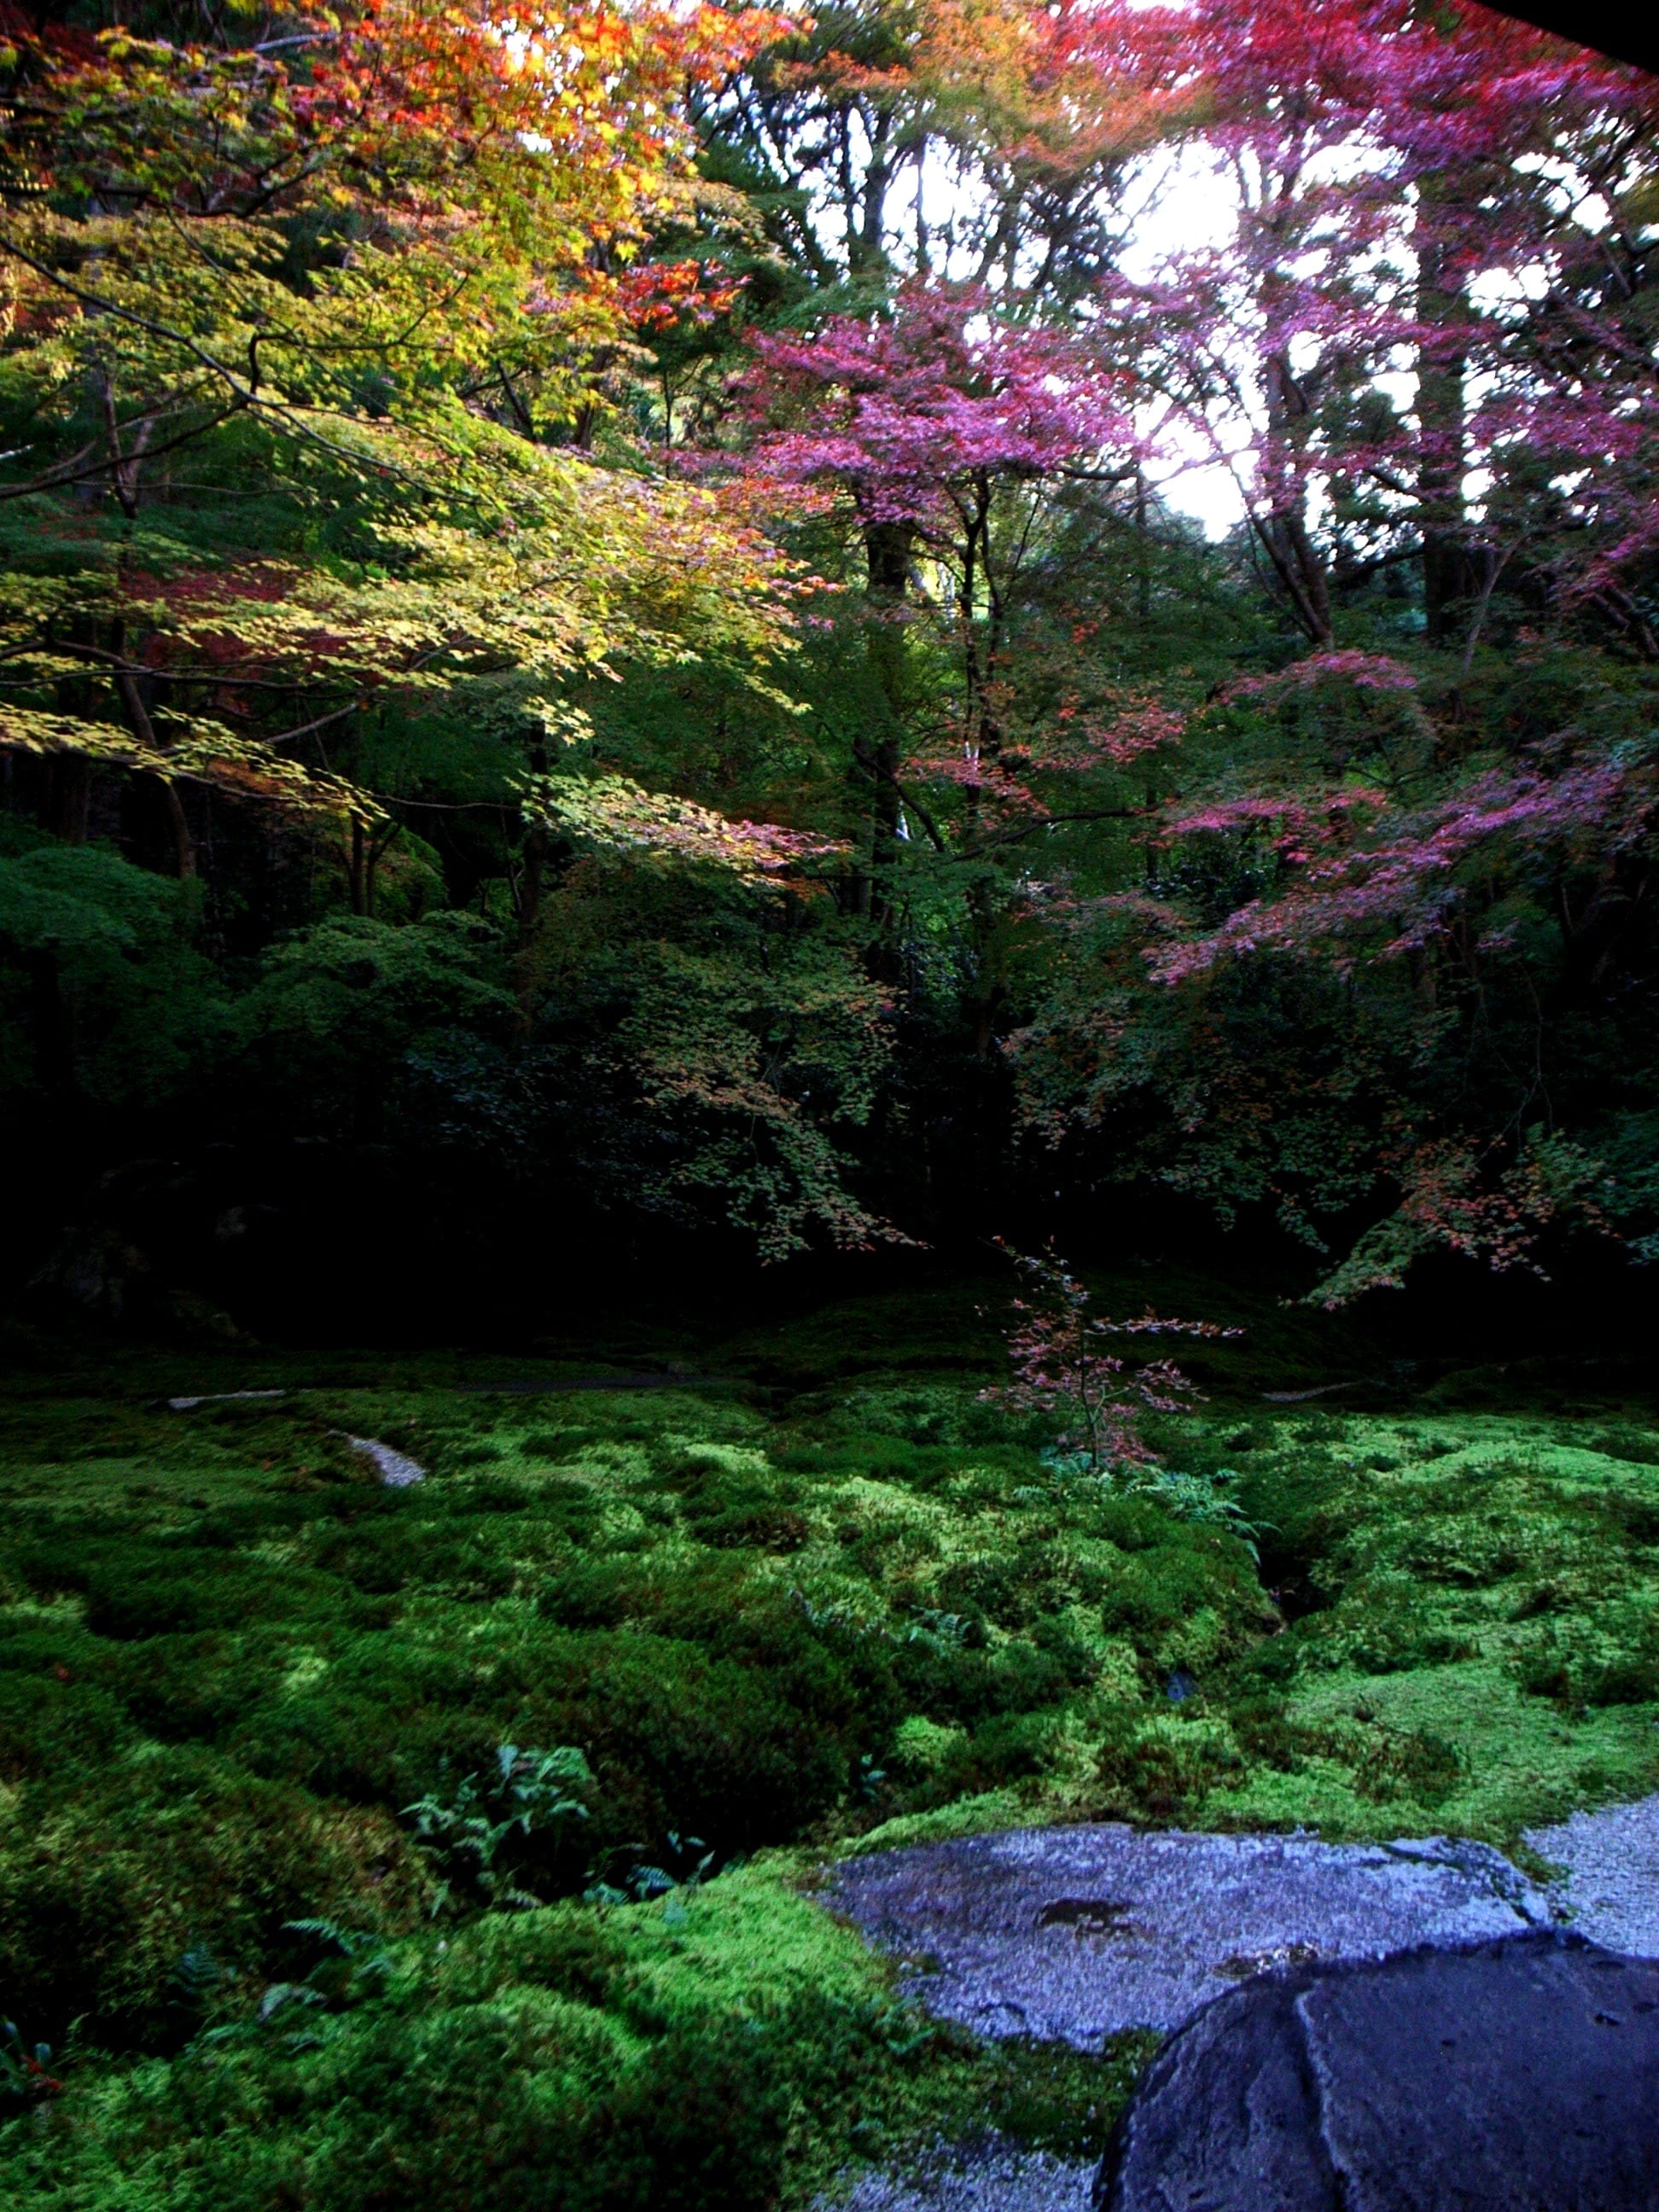 A vibrant moss garden: grey rocks in the right foreground; verdant moss on the ground; and trees with bright yellow and pinkish-red leaves in the background. 